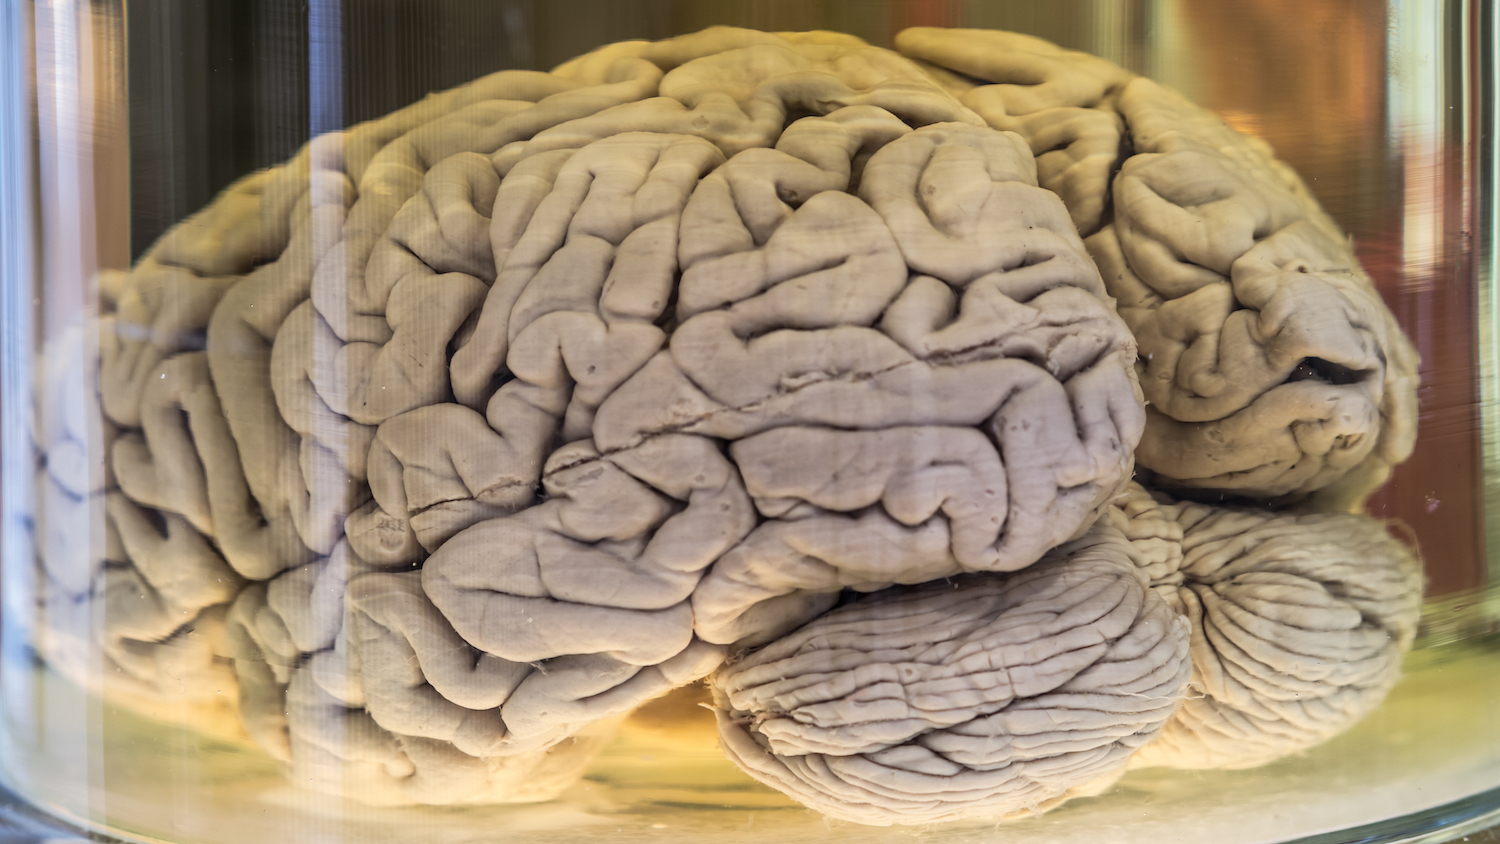 Why Do Our Brains Have Folds? | Live Science